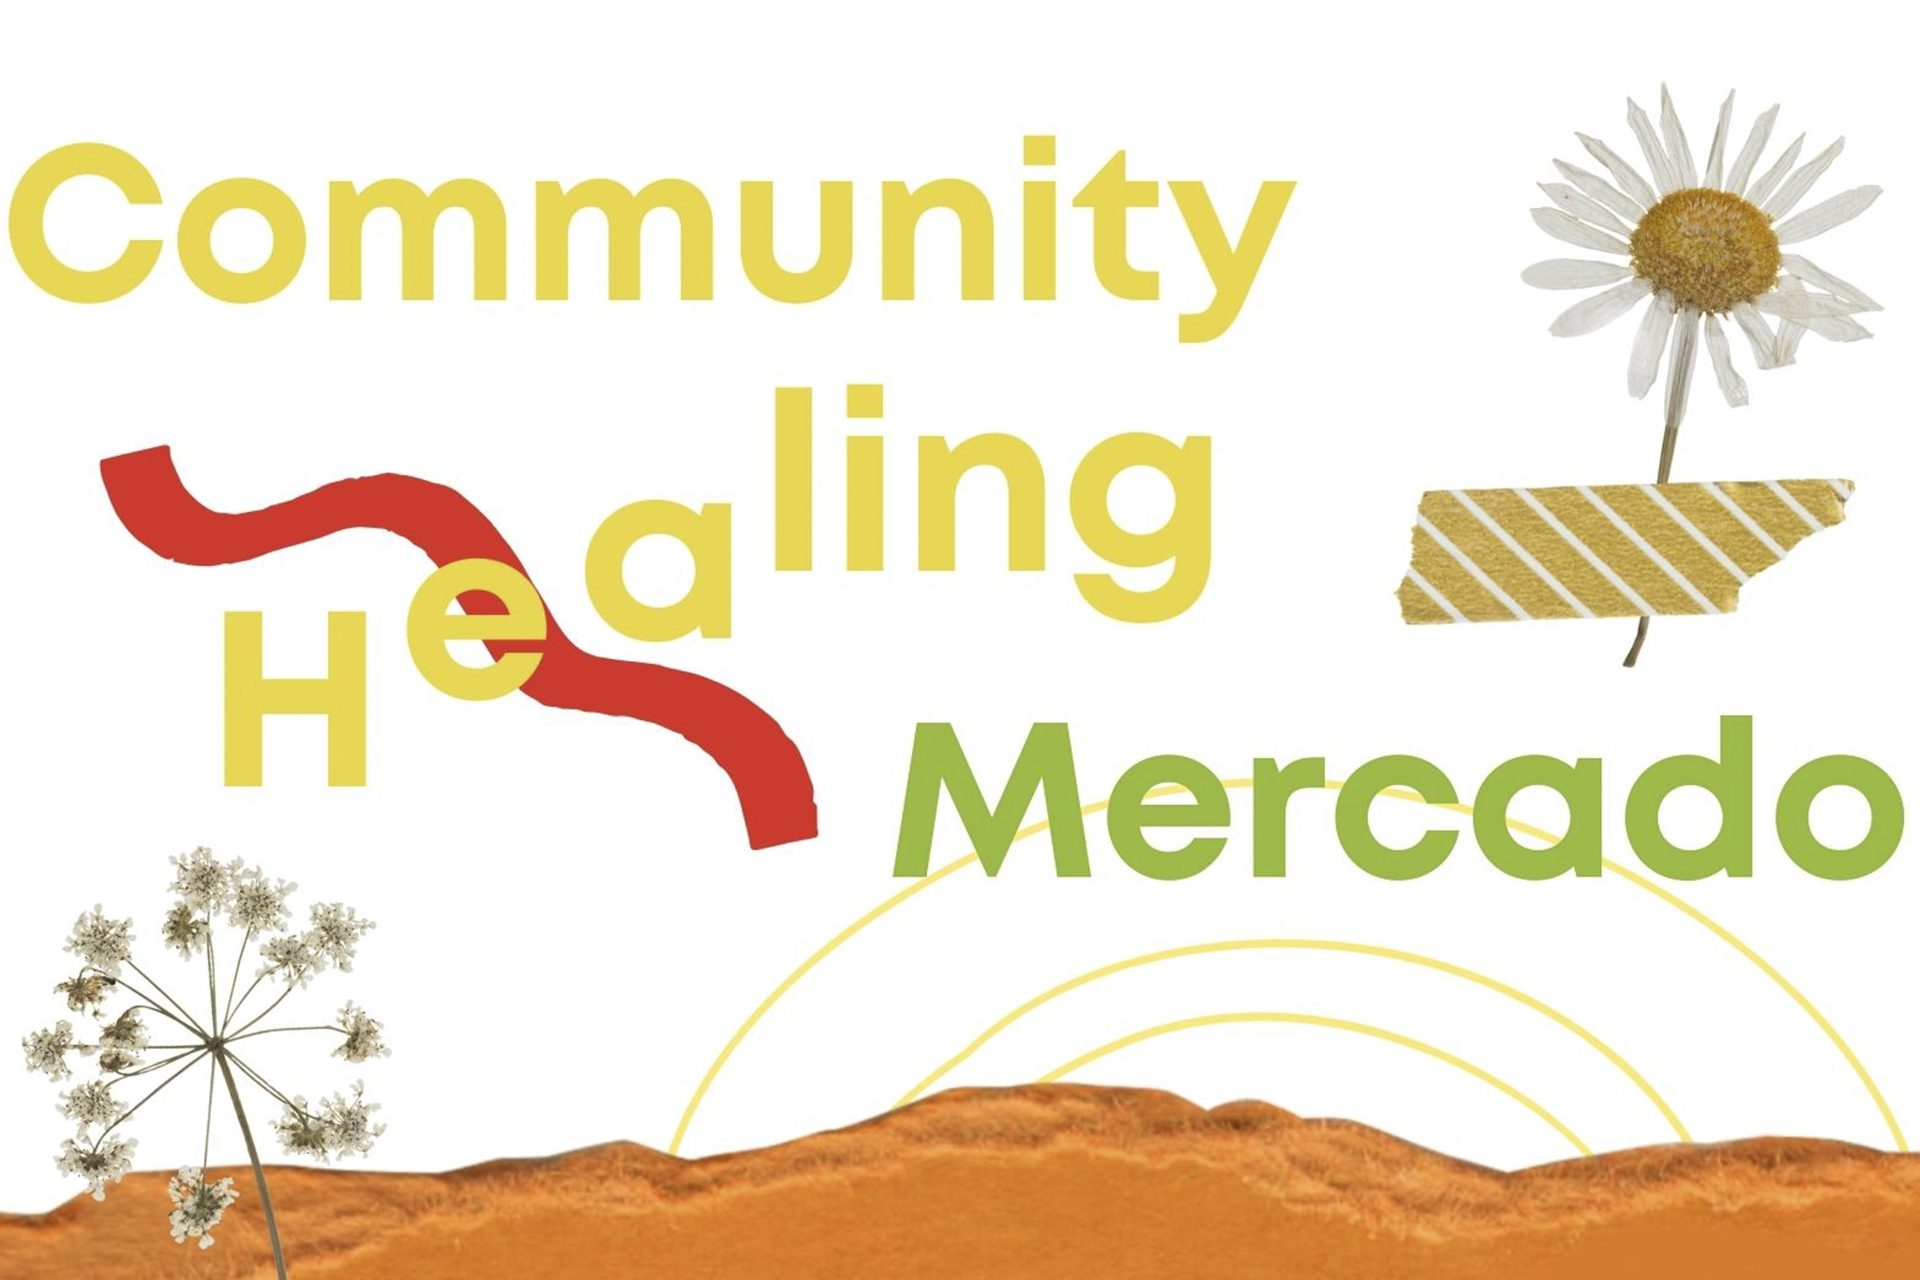 The words, "Community Healing Mercado" with flowers and soil